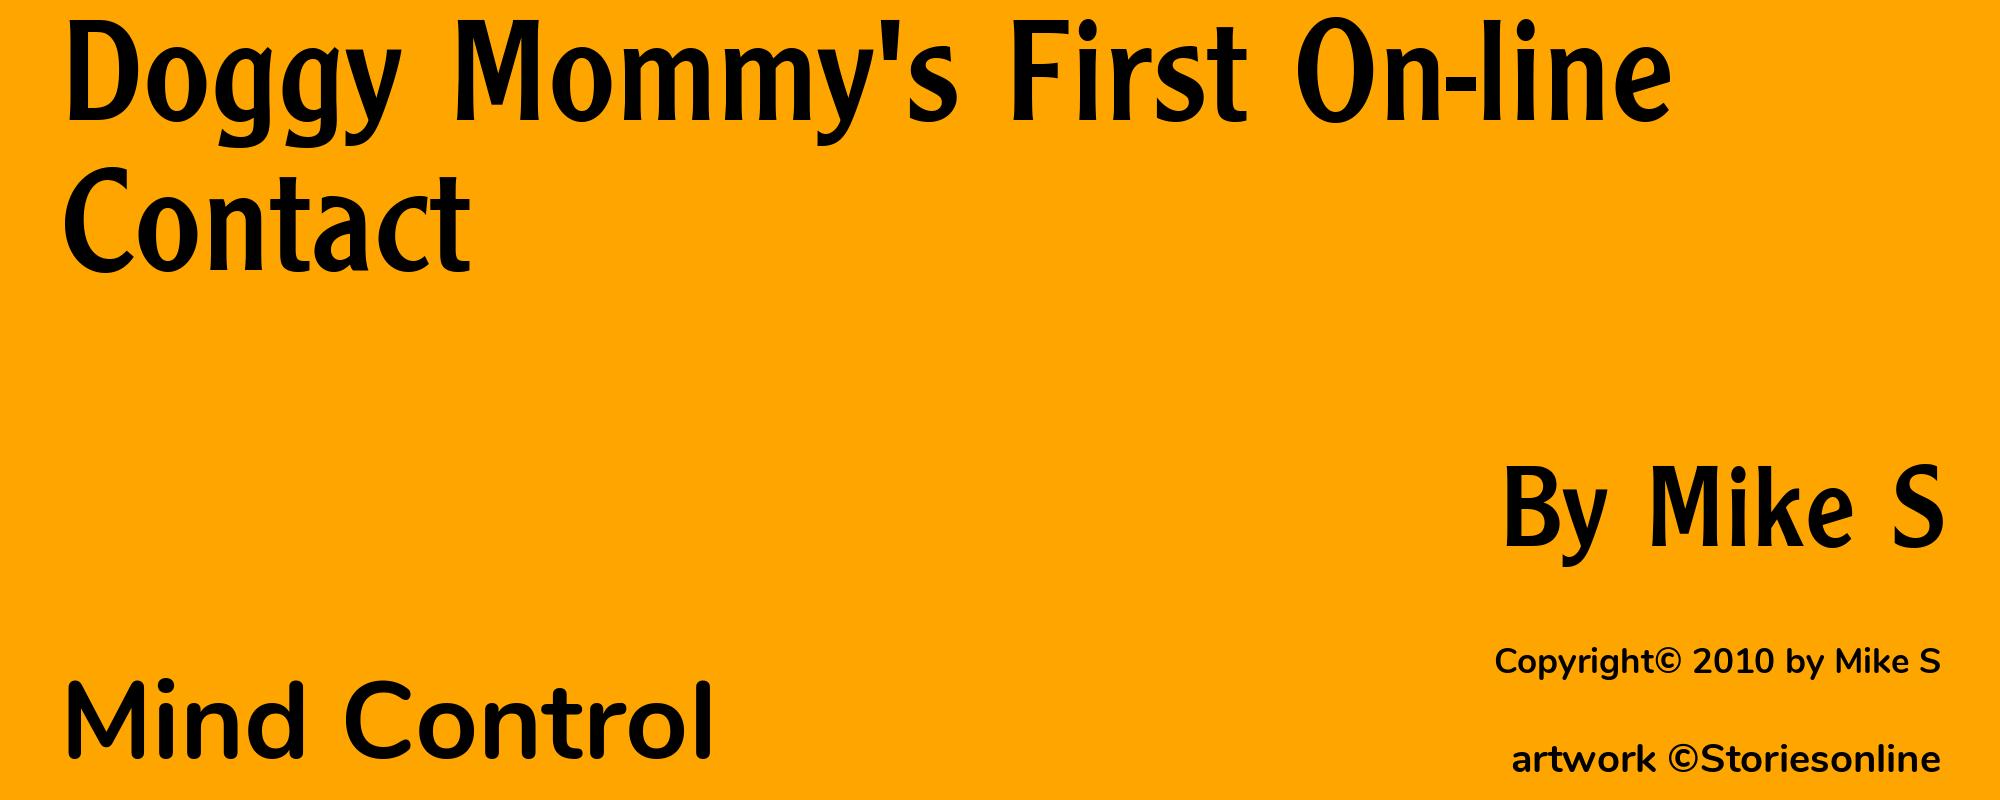 Doggy Mommy's First On-line Contact - Cover